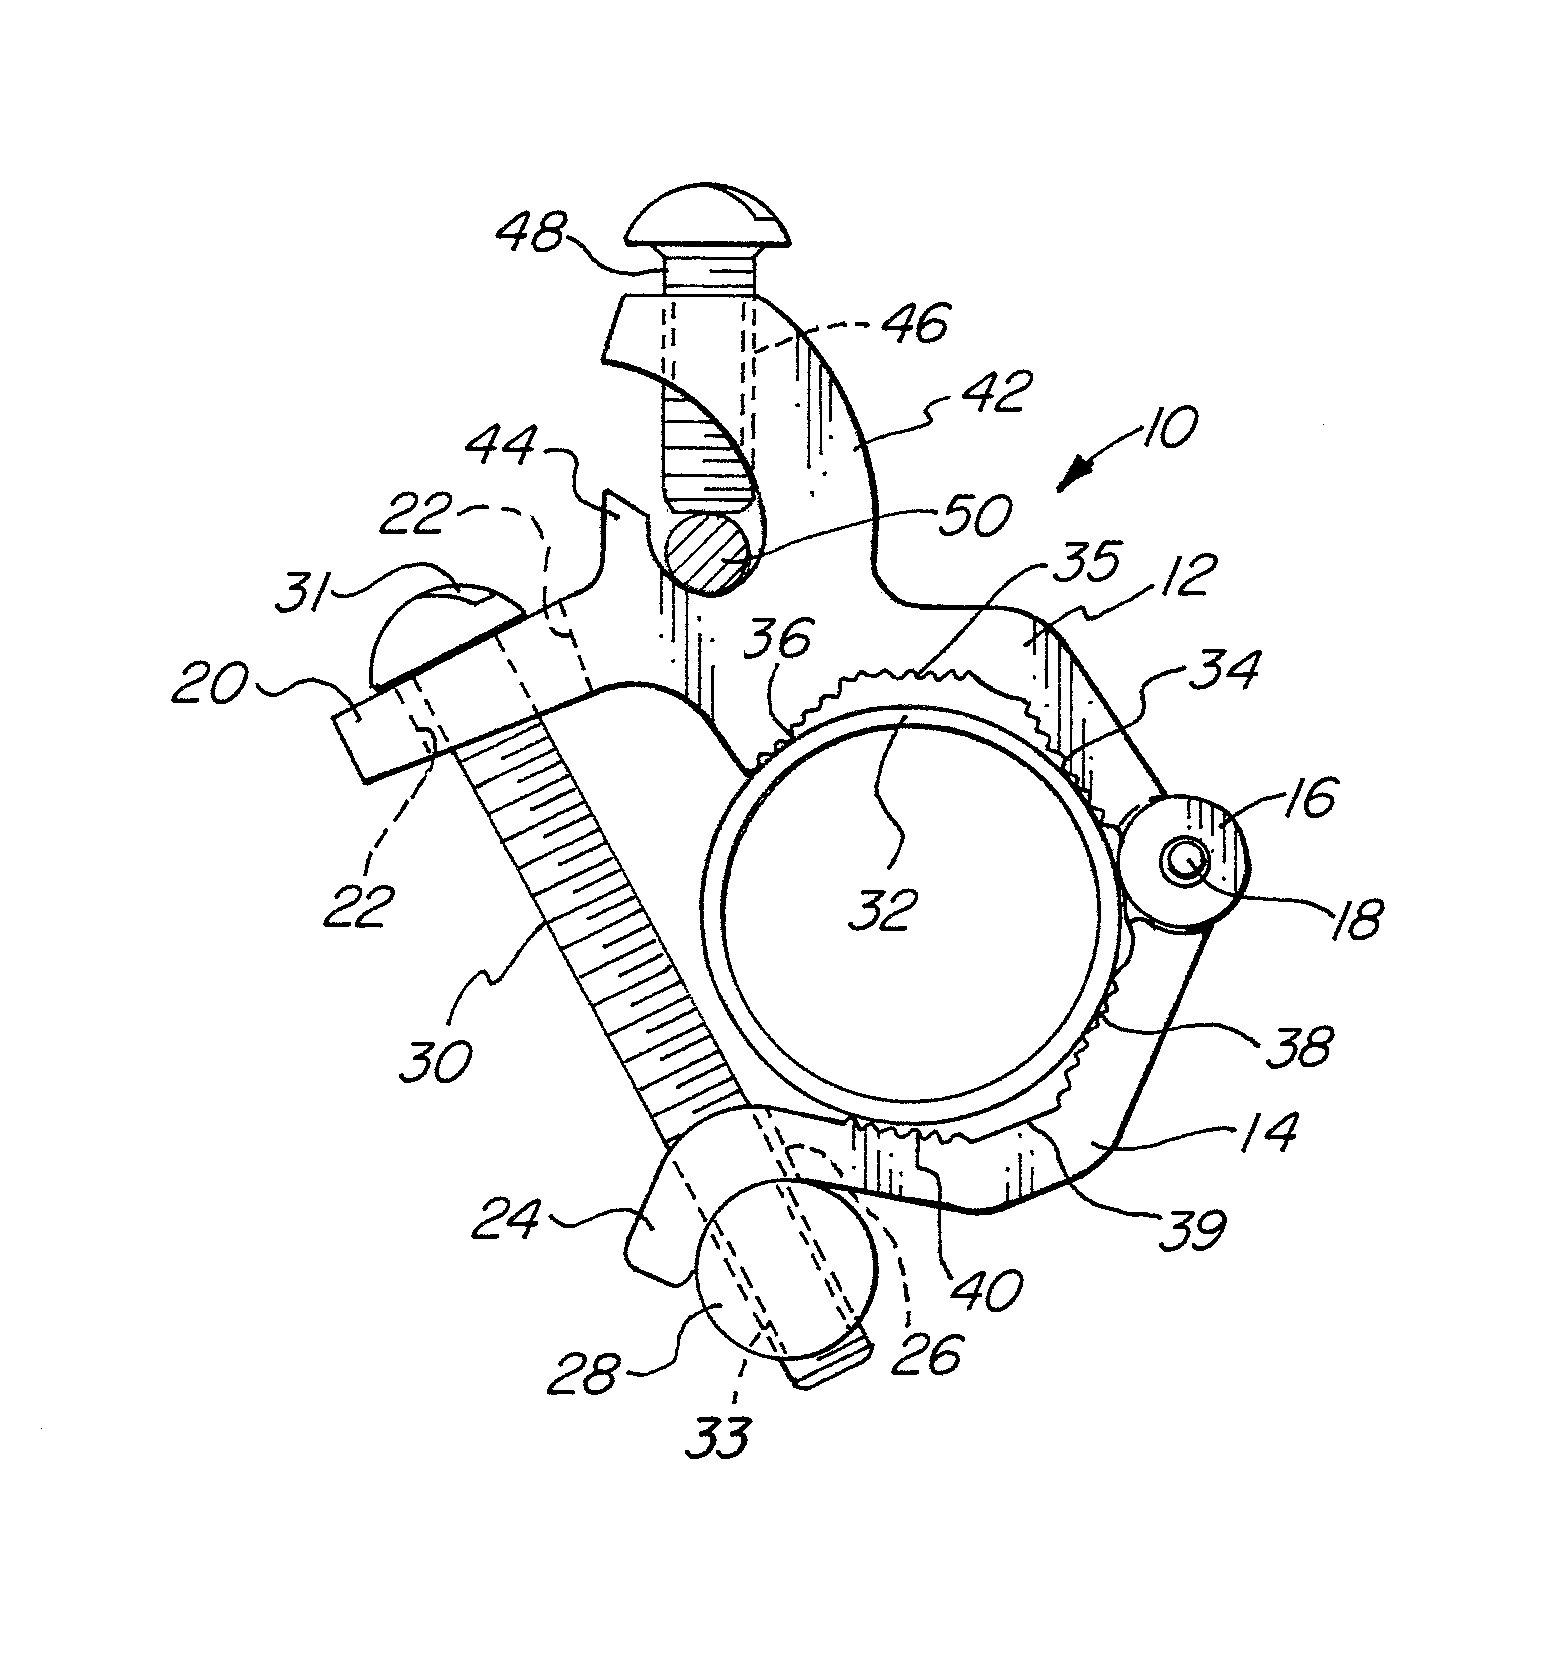 Electric ground clamp with pivoted jaws and single attached adjusting bolt and terminal block